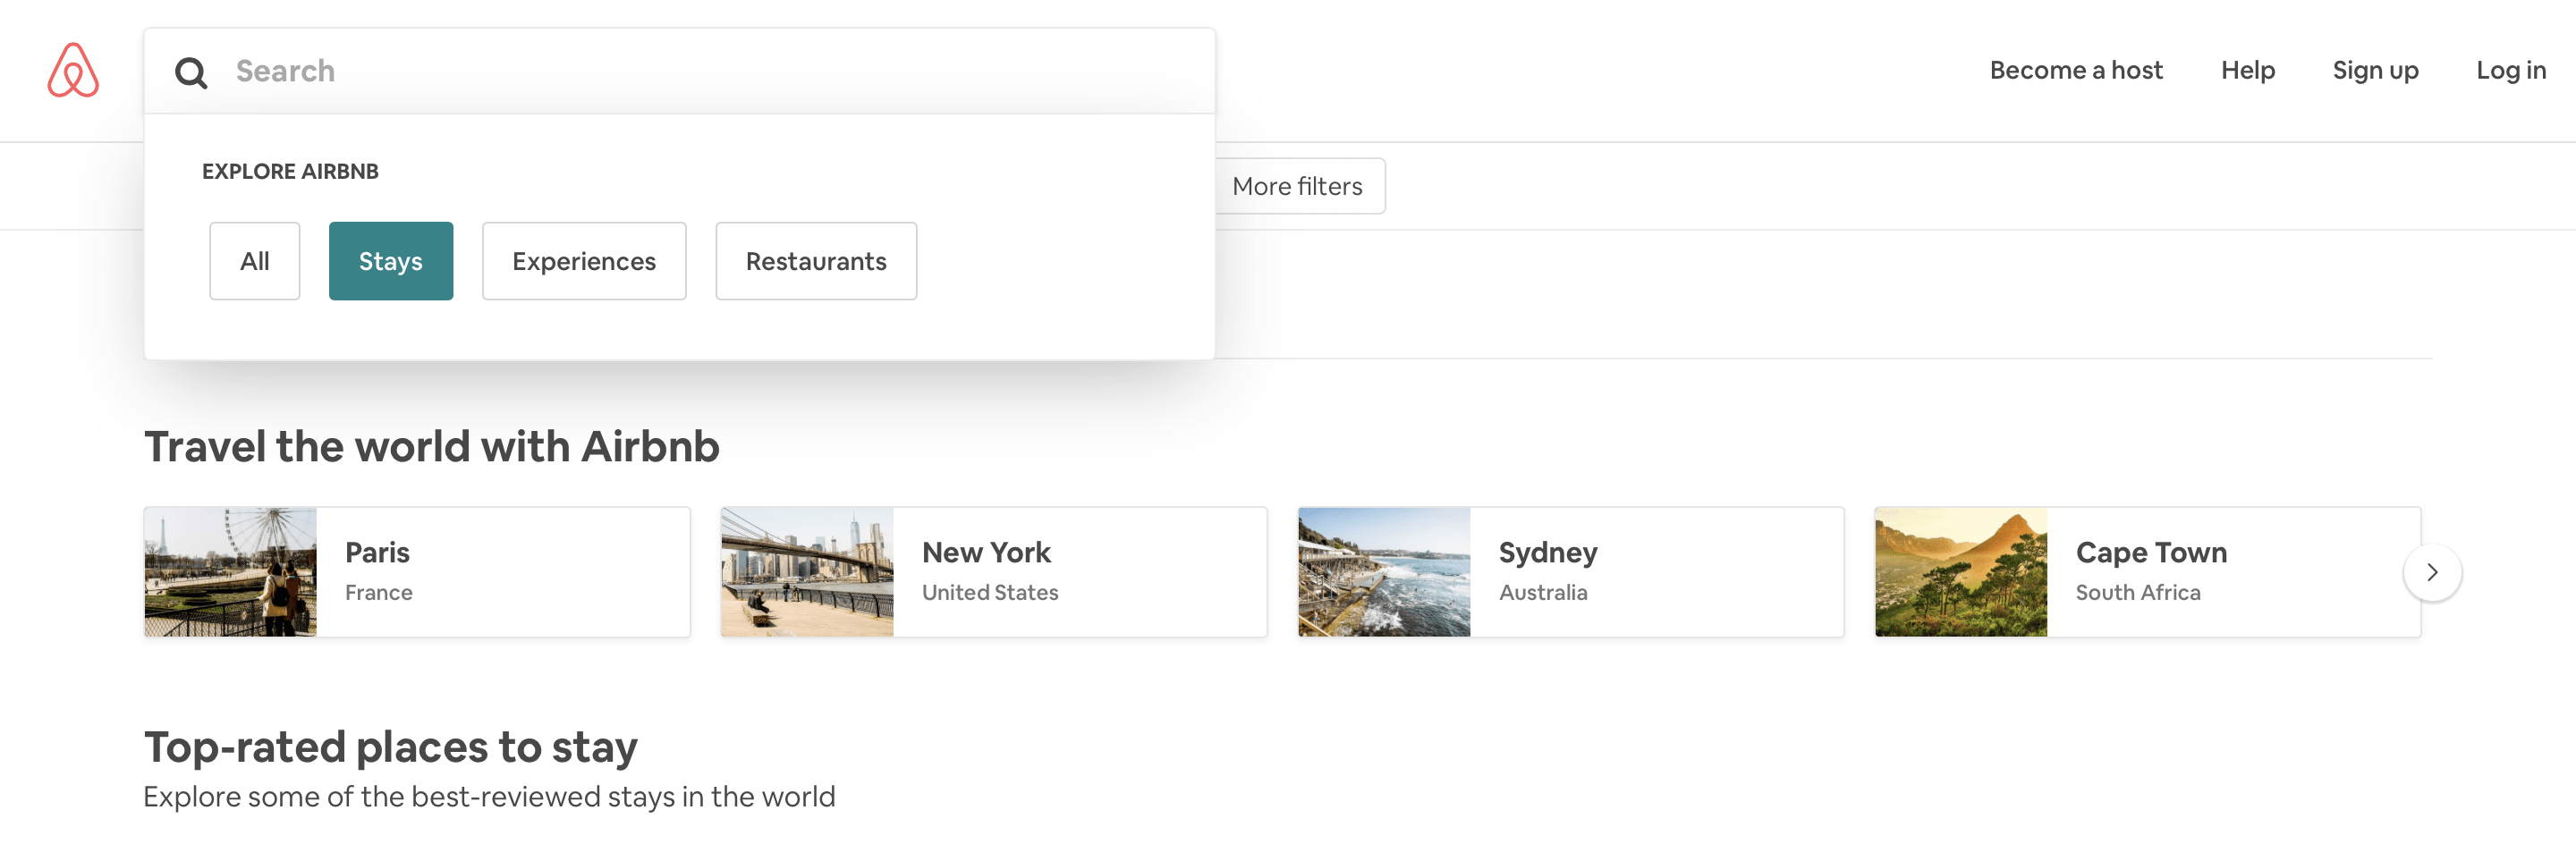 Airbnb Search Airbnb Stay Airbnb